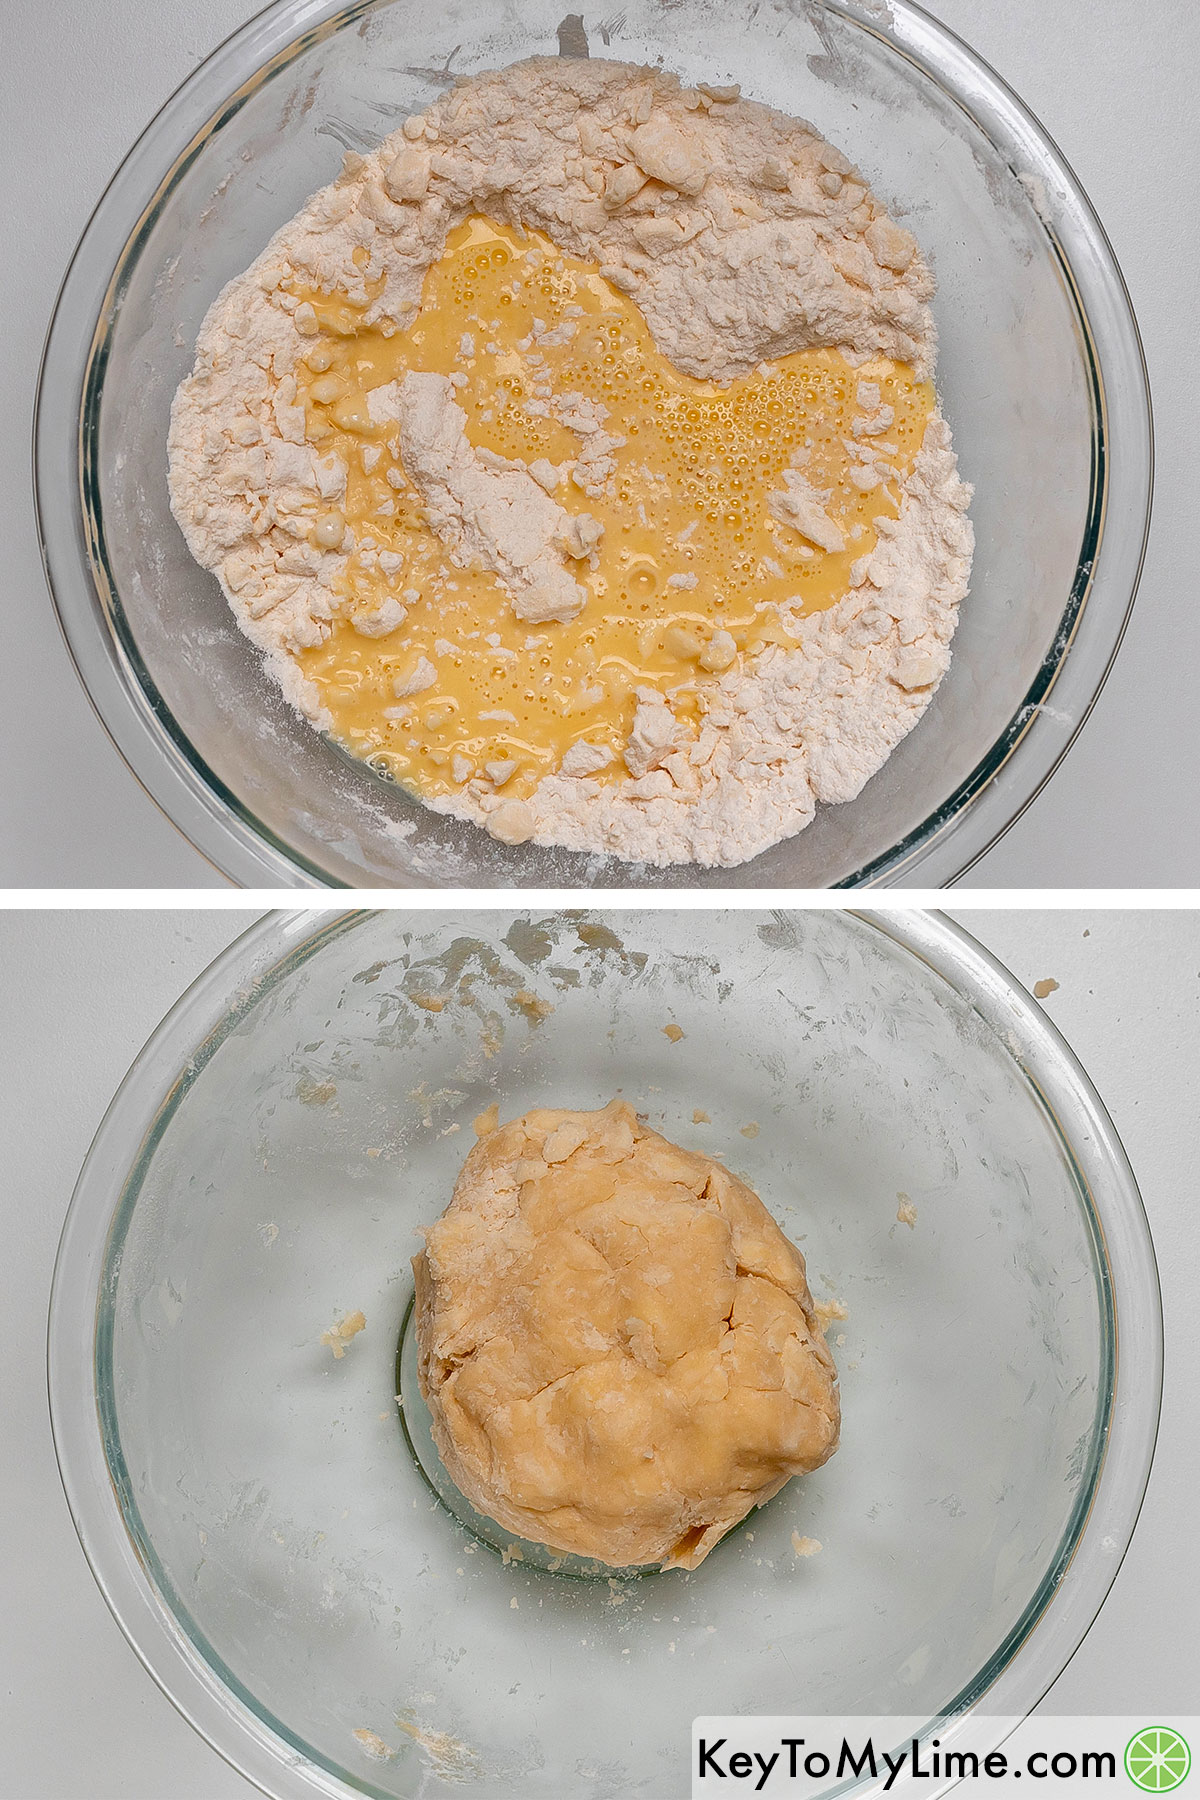 Adding the egg mixture to the flour, and then mixing together before forming into a ball.